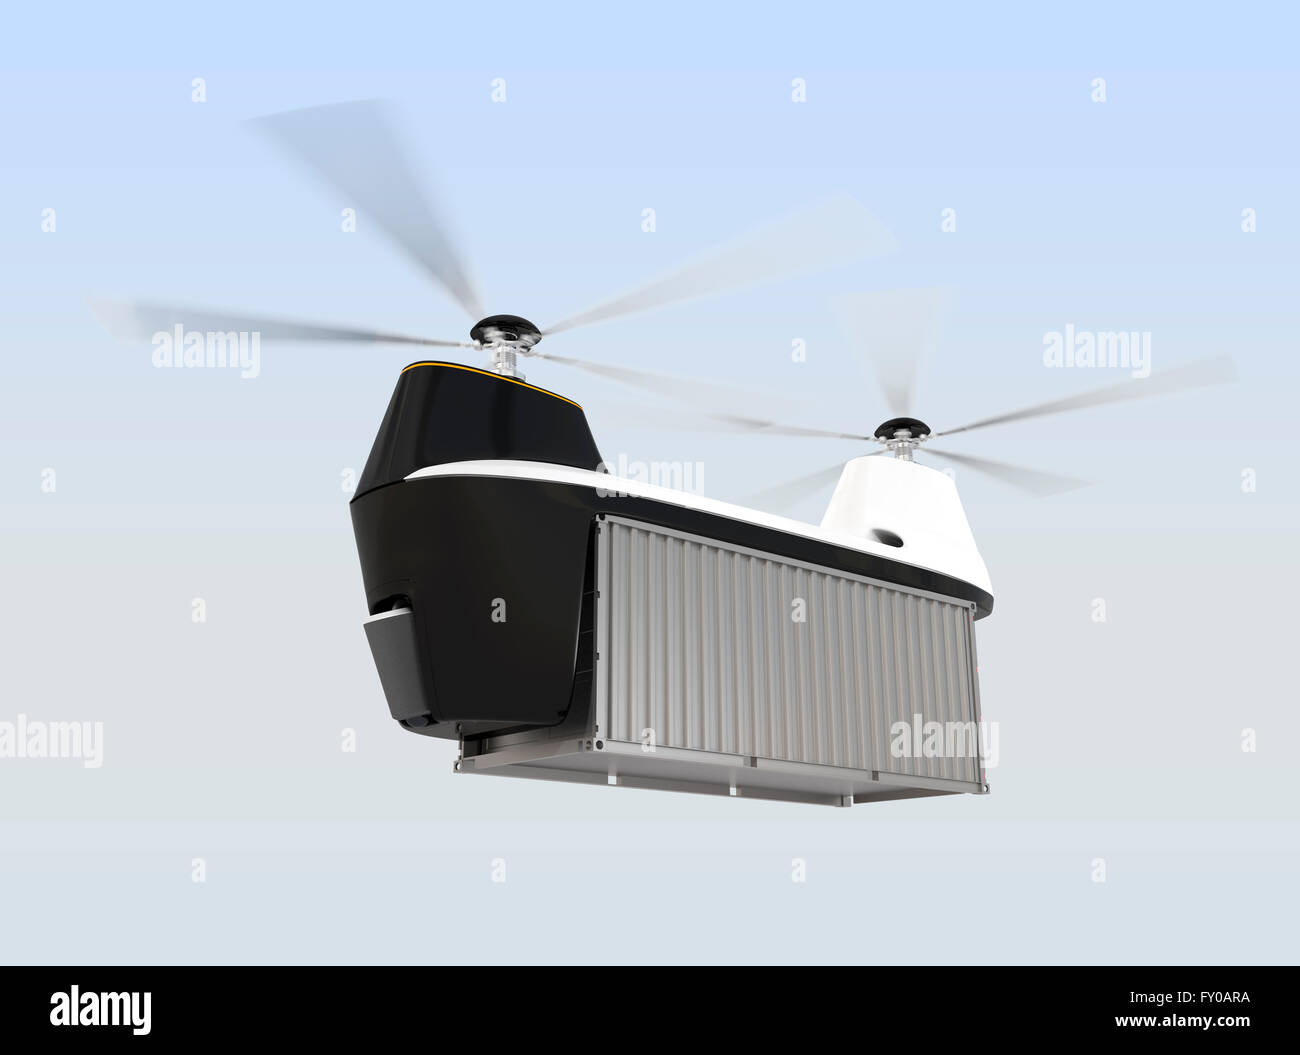 Drone carrying cargo container flying in the sky. 3D rendering image Stock Photo